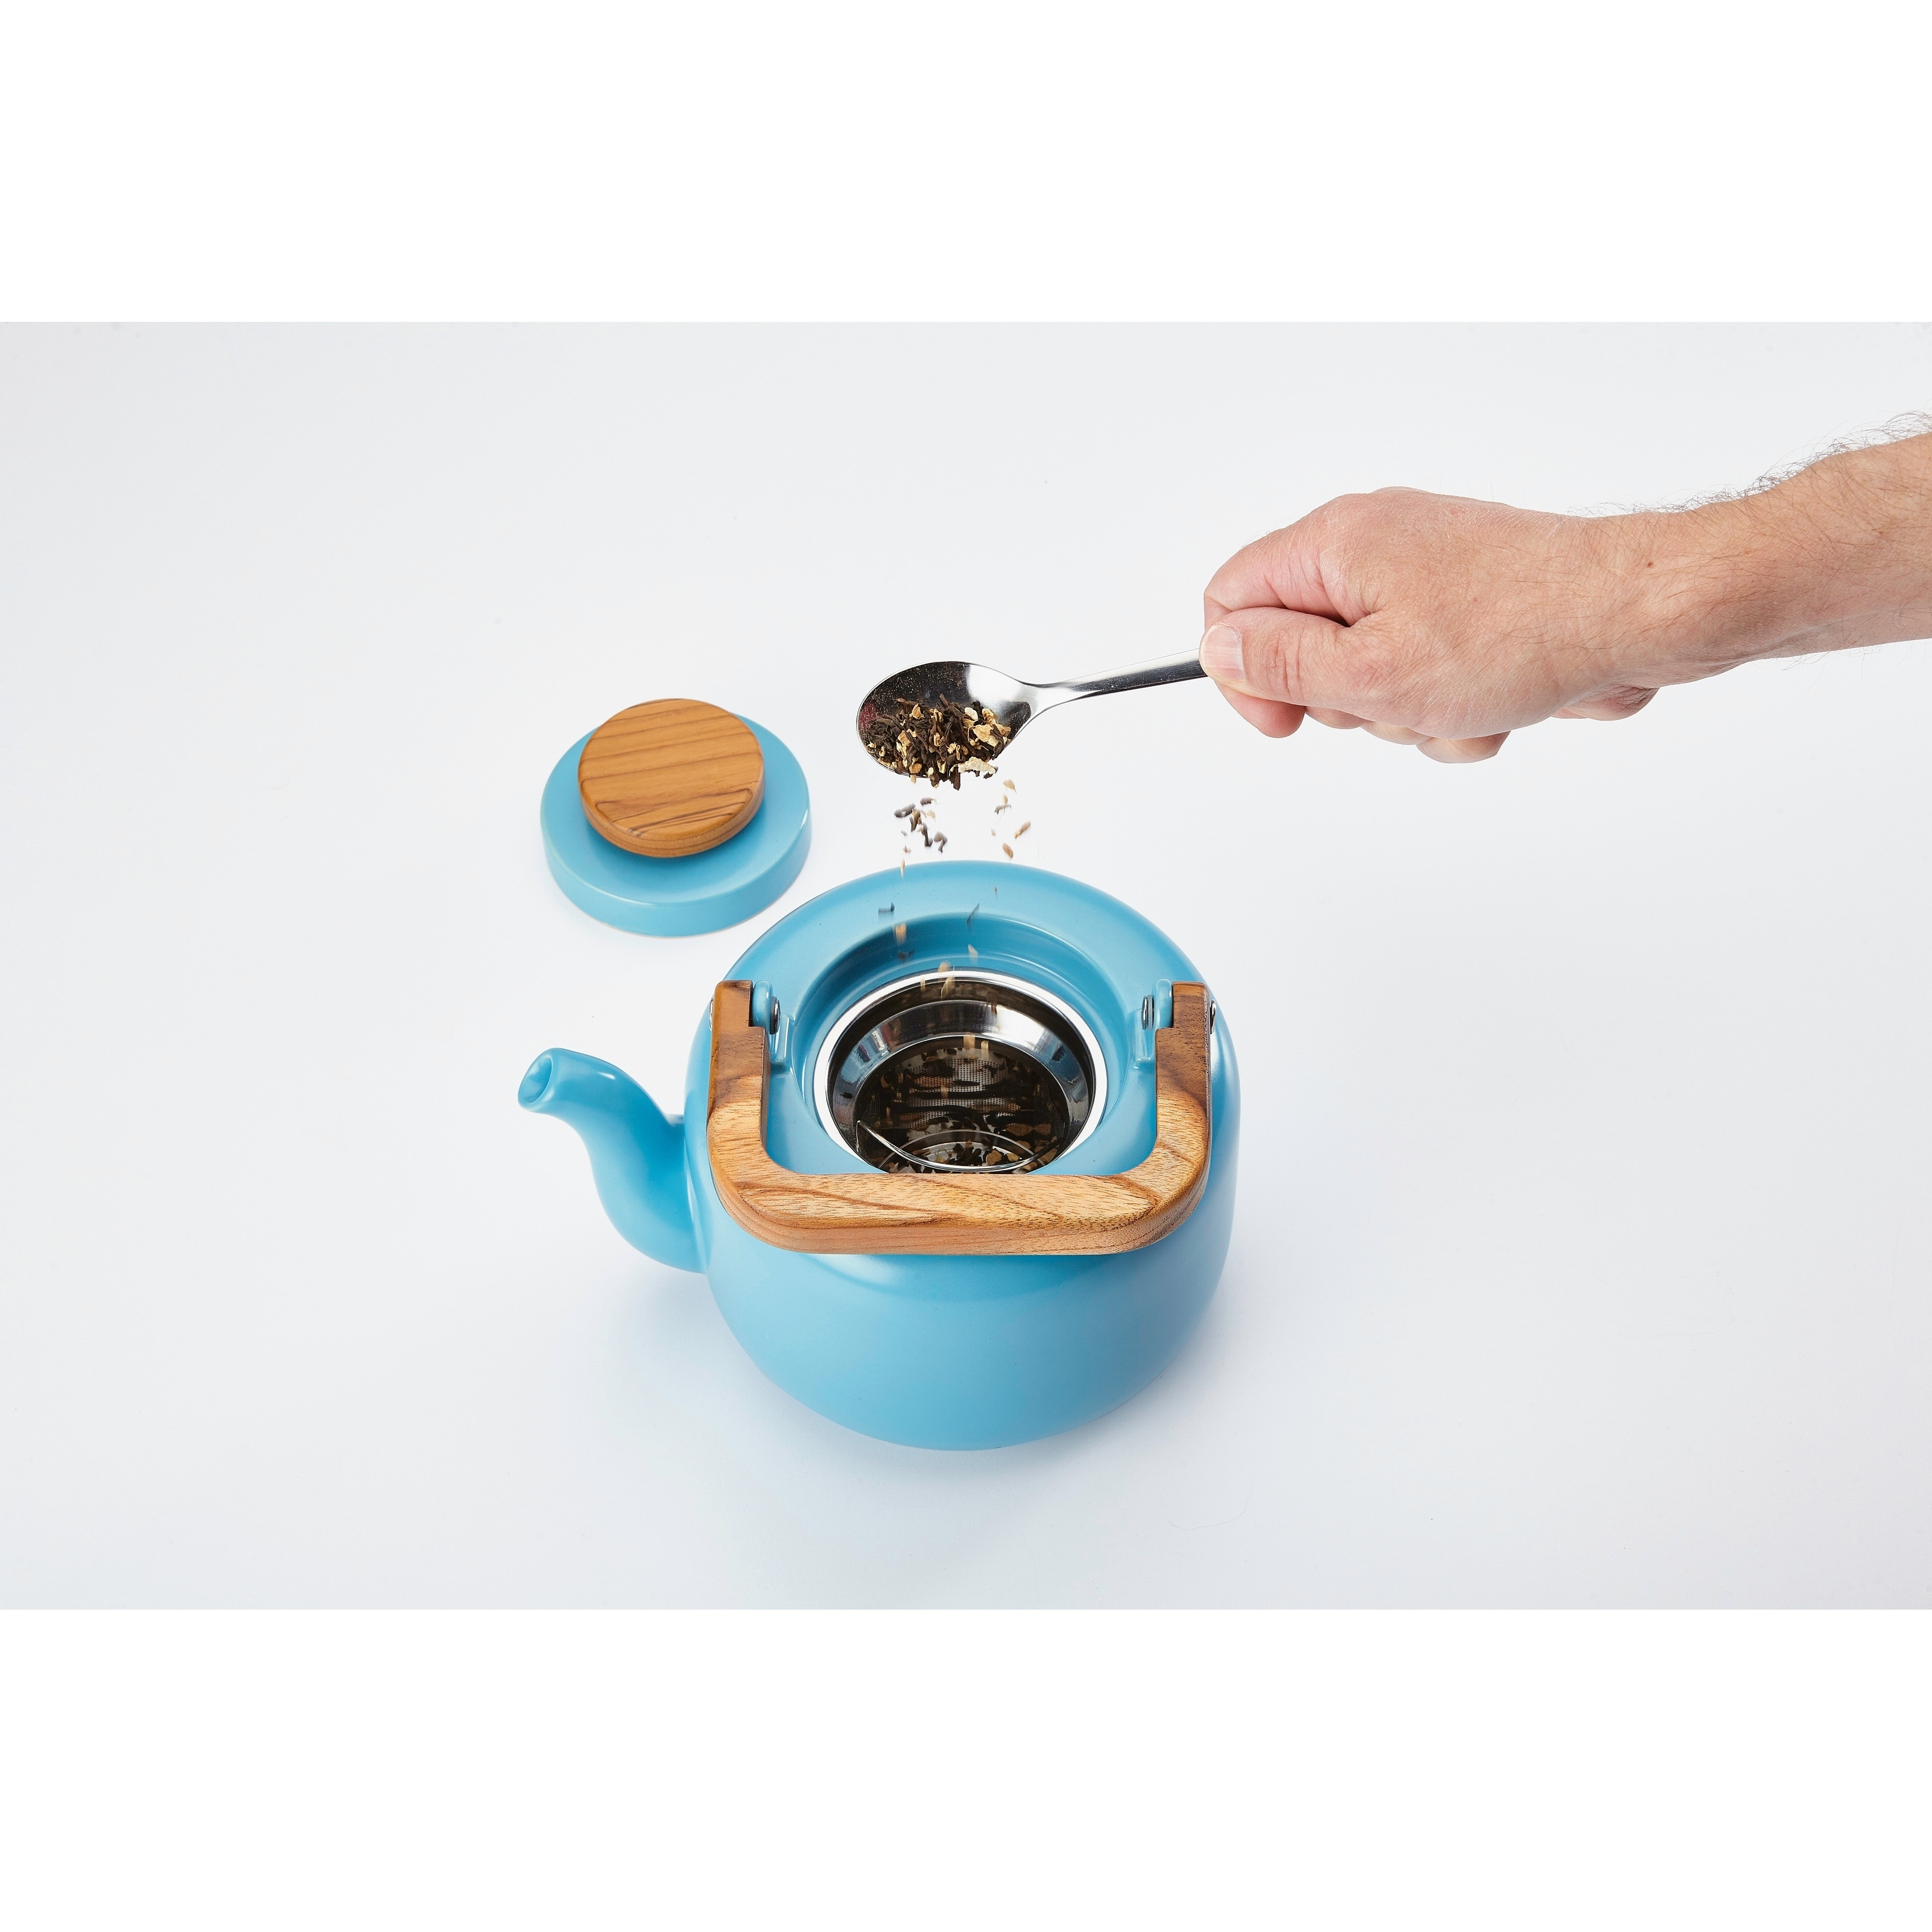 Blue Tea Infuser Cup with Lid and Wooden Handle